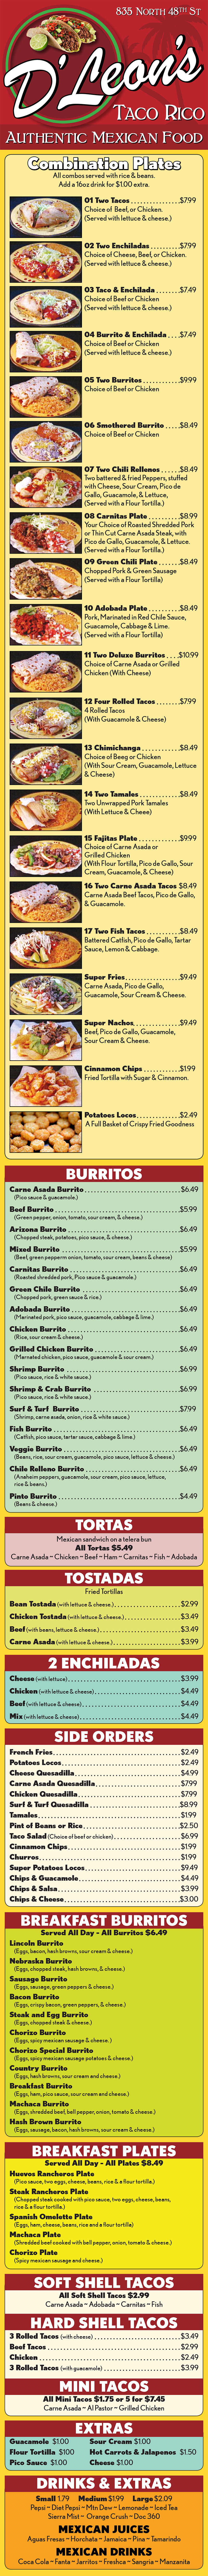 
835 North 48th St
FULL MENU WITH REAL PRICES! 
  Combination Plates
All combos served with rice & beans.
Add a 16oz drink for $1.00 extra.
01 Two Tacos $7.99
Choice of Beef, or Chicken.
(Served with lettuce & cheese.)
02 Two Enchiladas $7.99
Choice of Cheese, Beef, or Chicken.
(Served with lettuce & cheese.)
03 Taco & Enchilada $7.49
Choice of Beef or Chicken
(Served with lettuce & cheese.)
04 Burrito & Enchilada $7.49
Choice of Beef or Chicken
(Served with lettuce & cheese.)
05 Two Burritos $9.99
Choice of Beef or Chicken
06 Smothered Burrito $8.49
Choice of Beef or Chicken
07 Two Chili Rellenos $8.49
Two battered & fried Peppers, stuffed
with Cheese, Sour Cream, Pico de
Gallo, Guacamole, & Lettuce,
(Served with a Flour Tortilla.)
08 Carnitas Plate $8.99
Your Choice of Roasted Shredded Pork
or Thin Cut Carne Asada Steak, with
Pico de Gallo, Guacamole, & Lettuce.
(Served with a Flour Tortilla.)
09 Green Chili Plate $8.49
Chopped Pork & Green Sausage
(Served with a Flour Tortilla)
10 Adobada Plate $8.49
Pork, Marinated in Red Chile Sauce,
Guacamole, Cabbage & Lime.
(Served with a Flour Tortilla)
11 Two Deluxe Burritos $10.99
Choice of Carne Asada or Grilled
Chicken (With Cheese)
12 Four Rolled Tacos $7.99
4 Rolled Tacos
(With Guacamole & Cheese)
13 Chimichanga $8.49
Choice of Beeg or Chicken
(With Sour Cream, Guacamole, Lettuce
& Cheese)
14 Two Tamales $8.49
Two Unwrapped Pork Tamales
(With Lettuce & Cheee)
15 Fajitas Plate $9.99
Choice of Carne Asada or
Grilled Chicken
(With Flour Tortilla, Pico de Gallo, Sour
Cream, Guacamole, & Cheese)
16 Two Carne Asada Tacos $8.49
Carne Asada Beef Tacos, Pico de Gallo,
& Guacamole.
17 Two Fish Tacos $8.49
Battered Catfish, Pico de Gallo, Tartar
Sauce, Lemon & Cabbage.
Super Fries $9.49
Carne Asada, Pico de Gallo,
Guacamole, Sour Cream & Cheese.
Super Nachos $9.49
Beef, Pico de Gallo, Guacamole,
Sour Cream & Cheese.
Cinnamon Chips $1.99
Fried Tortilla with Sugar & Cinnamon.
Potatoes Locos $2.49
A Full Basket of Crispy Fried Goodness
BURRITOS
Carne Asada Burrito $6.49
(Pico sauce & guacamole.)
Beef Burrito $5.99
(Green pepper, onion, tomato, sour cream, & cheese.)
Arizona Burrito $6.49
(Chopped steak, potatoes, pico sauce, & cheese.)
Mixed Burrito $5.99
(Beef, green pepperm onion, tomato, sour cream, beans & cheese)
Carnitas Burrito $6.49
(Roasted shredded pork, Pico sauce & guacamole.)
Green Chile Burrito $6.49
(Chopped pork, green sauce & rice.)
Adobada Burrito $6.49
(Marinated pork, pico sauce, guacamole, cabbage & lime.)
Chicken Burrito $6.49
(Rice, sour cream & cheese.)
Grilled Chicken Burrito $6.49
(Marnated chicken, pico sauce, guacamole & sour cream.)
Shrimp Burrito $6.99
(Pico sauce, rice & white sauce.)
Shrimp & Crab Burrito $6.99
(Pico sauce, rice & white sauce.)
Surf & Turf Burrito $7.99
(Shrimp, carne asada, onion, rice & white sauce.)
Fish Burrito $6.49
(Catfish, pico sauce, tartar sauce, cabbage & lime.)
Veggie Burrito $6.49
(Beans, rice, sour cream, guacamole, pico sauce, lettuce & cheese.)
Chile Relleno Burrito $6.49
(Anaheim peppers, guacamole, sour cream, pico sauce, lettuce,
rice & beans.)
Pinto Burrito $4.49
(Beans & cheese.)
TORTAS
Mexican sandwich on a telera bun
All Tortas $5.49
Carne Asada ~ Chicken ~ Beef ~ Ham ~ Carnitas ~ Fish ~ Adobada
TOSTADAS
Fried Tortillas
Bean Tostada (with lettuce & cheese.) $2.99
Chicken Tostada (with lettuce & cheese.) $3.49
Beef (with beans, lettuce & cheese.) $3.49
Carne Asada (with lettuce & cheese.) $3.99
2 ENCHILADAS
Cheese (with lettuce) $3.99
Chicken (with lettuce & cheese) $4.49
Beef (with lettuce & cheese) $4.49
Mix (with lettuce & cheese) $4.49
SIDE ORDERS
French Fries $2.49
Potatoes Locos $2.49
Cheese Quesadilla $4.99
Carne Asada Quesadilla $7.99
Chicken Quesadilla $7.99
Surf & Turf Quesadilla $8.99
Tamales $1.99
Pint of Beans or Rice $2.50
Taco Salad (Choice of beef or chicken) $6.99
Cinnamon Chips $1.99
Churros $1.99
Super Potatoes Locos $9.49
Chips & Guacamole $4.49
Chips & Salsa $3.99
Chips & Cheese $3.00
BREAKFAST BURRITOS
Served All Day - All Burritos $6.49
Lincoln Burrito
(Eggs, bacon, hash browns, sour cream & cheese.)
Nebraska Burrito
(Eggs, chopped steak, hash browns, & cheese.)
Sausage Burrito
(Eggs, sausage, green peppers & cheese.)
Bacon Burrito
(Eggs, crispy bacon, green peppers, & cheese.)
Steak and Egg Burrito
(Eggs, chopped steak & cheese.)
Chorizo Burrito
(Eggs, spicy mexican sausage & cheese. )
Chorizo Special Burrito
(Eggs, spicy mexican sausage potatoes & cheese.)
Country Burrito
(Eggs, hash browns, sour cream and cheese.)
Breakfast Burrito
(Eggs, ham, pico sauce, sour cream and cheese.)
Machaca Burrito
(Eggs, shredded beef, bell pepper, onion, tomato & cheese.)
Hash Brown Burrito
(Eggs, sausage, bacon, hash browns, sour cream & cheese.)
BREAKFAST PLATES
Served All Day - All Plates $8.49
Huevos Rancheros Plate
(Pico sauce, two eggs, cheese, beans, rice & a flour tortilla.)
Steak Rancheros Plate
(Chopped steak cooked with pico sauce, two eggs, cheese, beans,
rice & a flour tortilla.)
Spanish Omelette Plate
(Eggs, ham, cheese, beans, rice and a flour tortilla)
Machaca Plate
(Shredded beef cooked with bell pepper, onion, tomato & cheese.)
Chorizo Plate
(Spicy mexican sausage and cheese.)
SOFT SHELL TACOS
All Soft Shell Tacos $2.99
Carne Asada ~ Adobada ~ Carnitas ~ Fish
HARD SHELL TACOS
3 Rolled Tacos (with cheese) $3.49
Beef Tacos $2.99
Chicken $2.49
3 Rolled Tacos (with guacamole) $3.99
MINI TACOS
All Mini Tacos $1.75 or 5 for $7.45
Carne Asada ~ Al Pastor ~ Grilled Chicken
EXTRAS
Guacamole $1.00 Sour Cream $1.00
Flour Tortilla $100 Hot Carrots & Jalapenos $1.50
Pico Sauce $1.00 Cheese $1.00
DRINKS & EXTRAS
Small 1.79 Medium $1.99 Large $2.09
Pepsi ~ Diet Pepsi ~ Mtn Dew ~ Lemonade ~ Iced Tea
Sierra Mist ~ Orange Crush ~ Doc 360
MEXICAN JUICES
Aguas Fresas ~ Horchata ~ Jamaica ~ Pina ~ Tamarindo
MEXICAN DRINKS
Coca Cola ~ Fanta ~ Jarritos ~ Freshca ~ Sangria ~ Manzanita
D’Leon’s
Get D'Leon's 835 N 48th St delivery! Order online with Metro Dining Delivery and get great Mexican Food from D'Leon's delivered to your home or office FAST.
